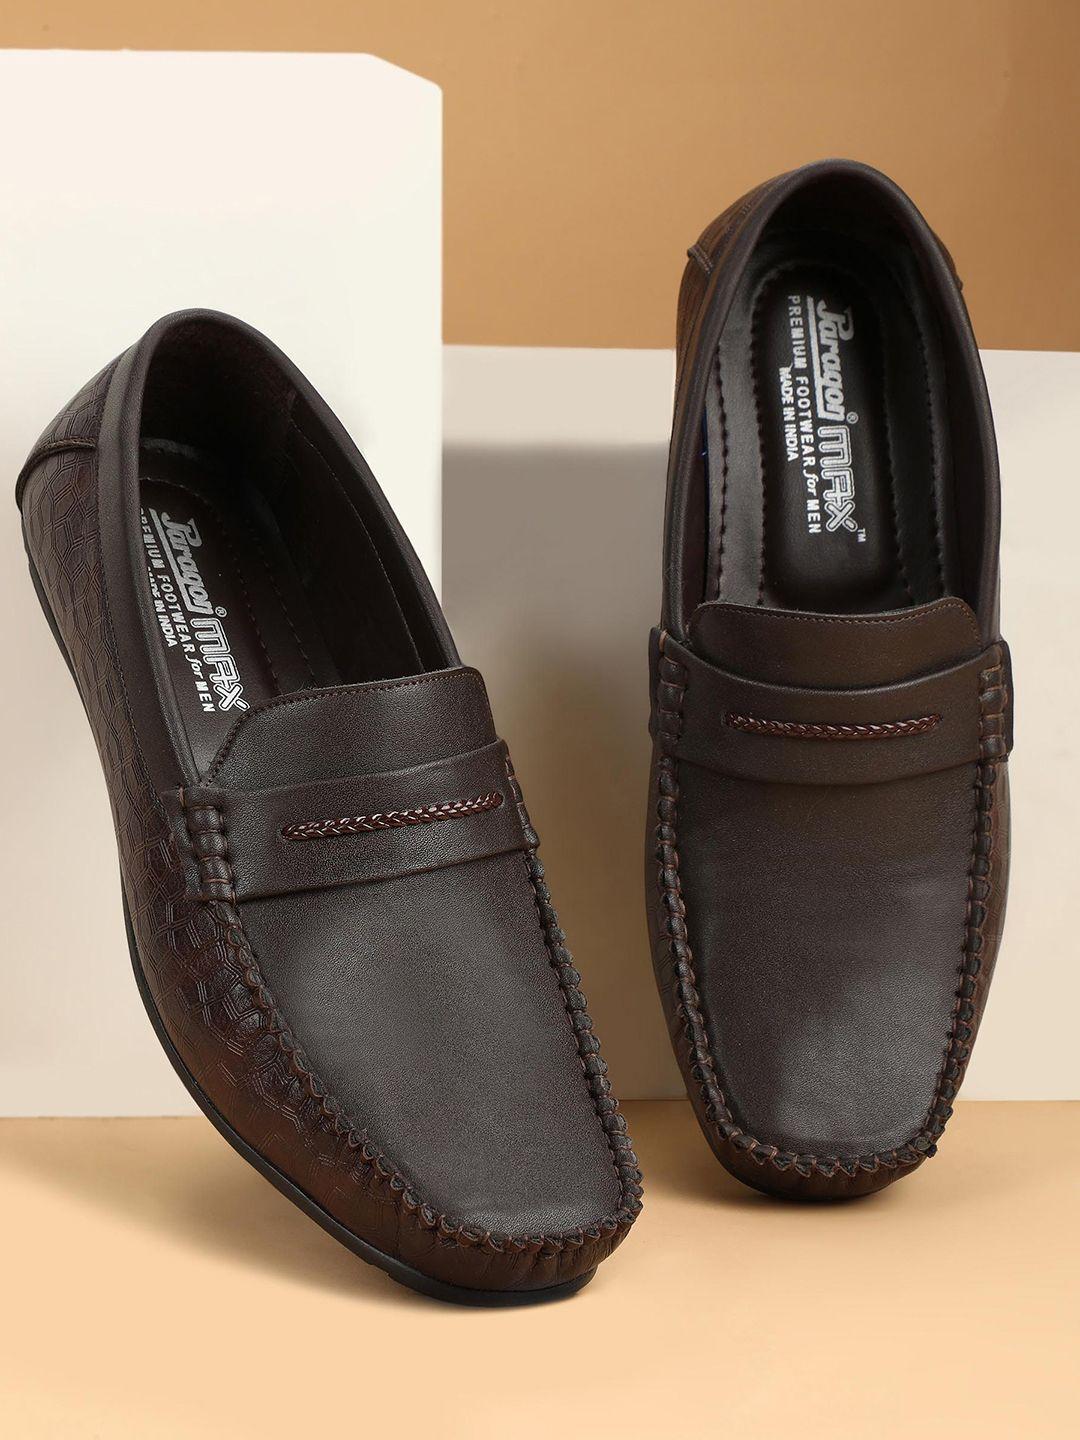 paragon-men-anti-skid-sole-formal-penny-loafers